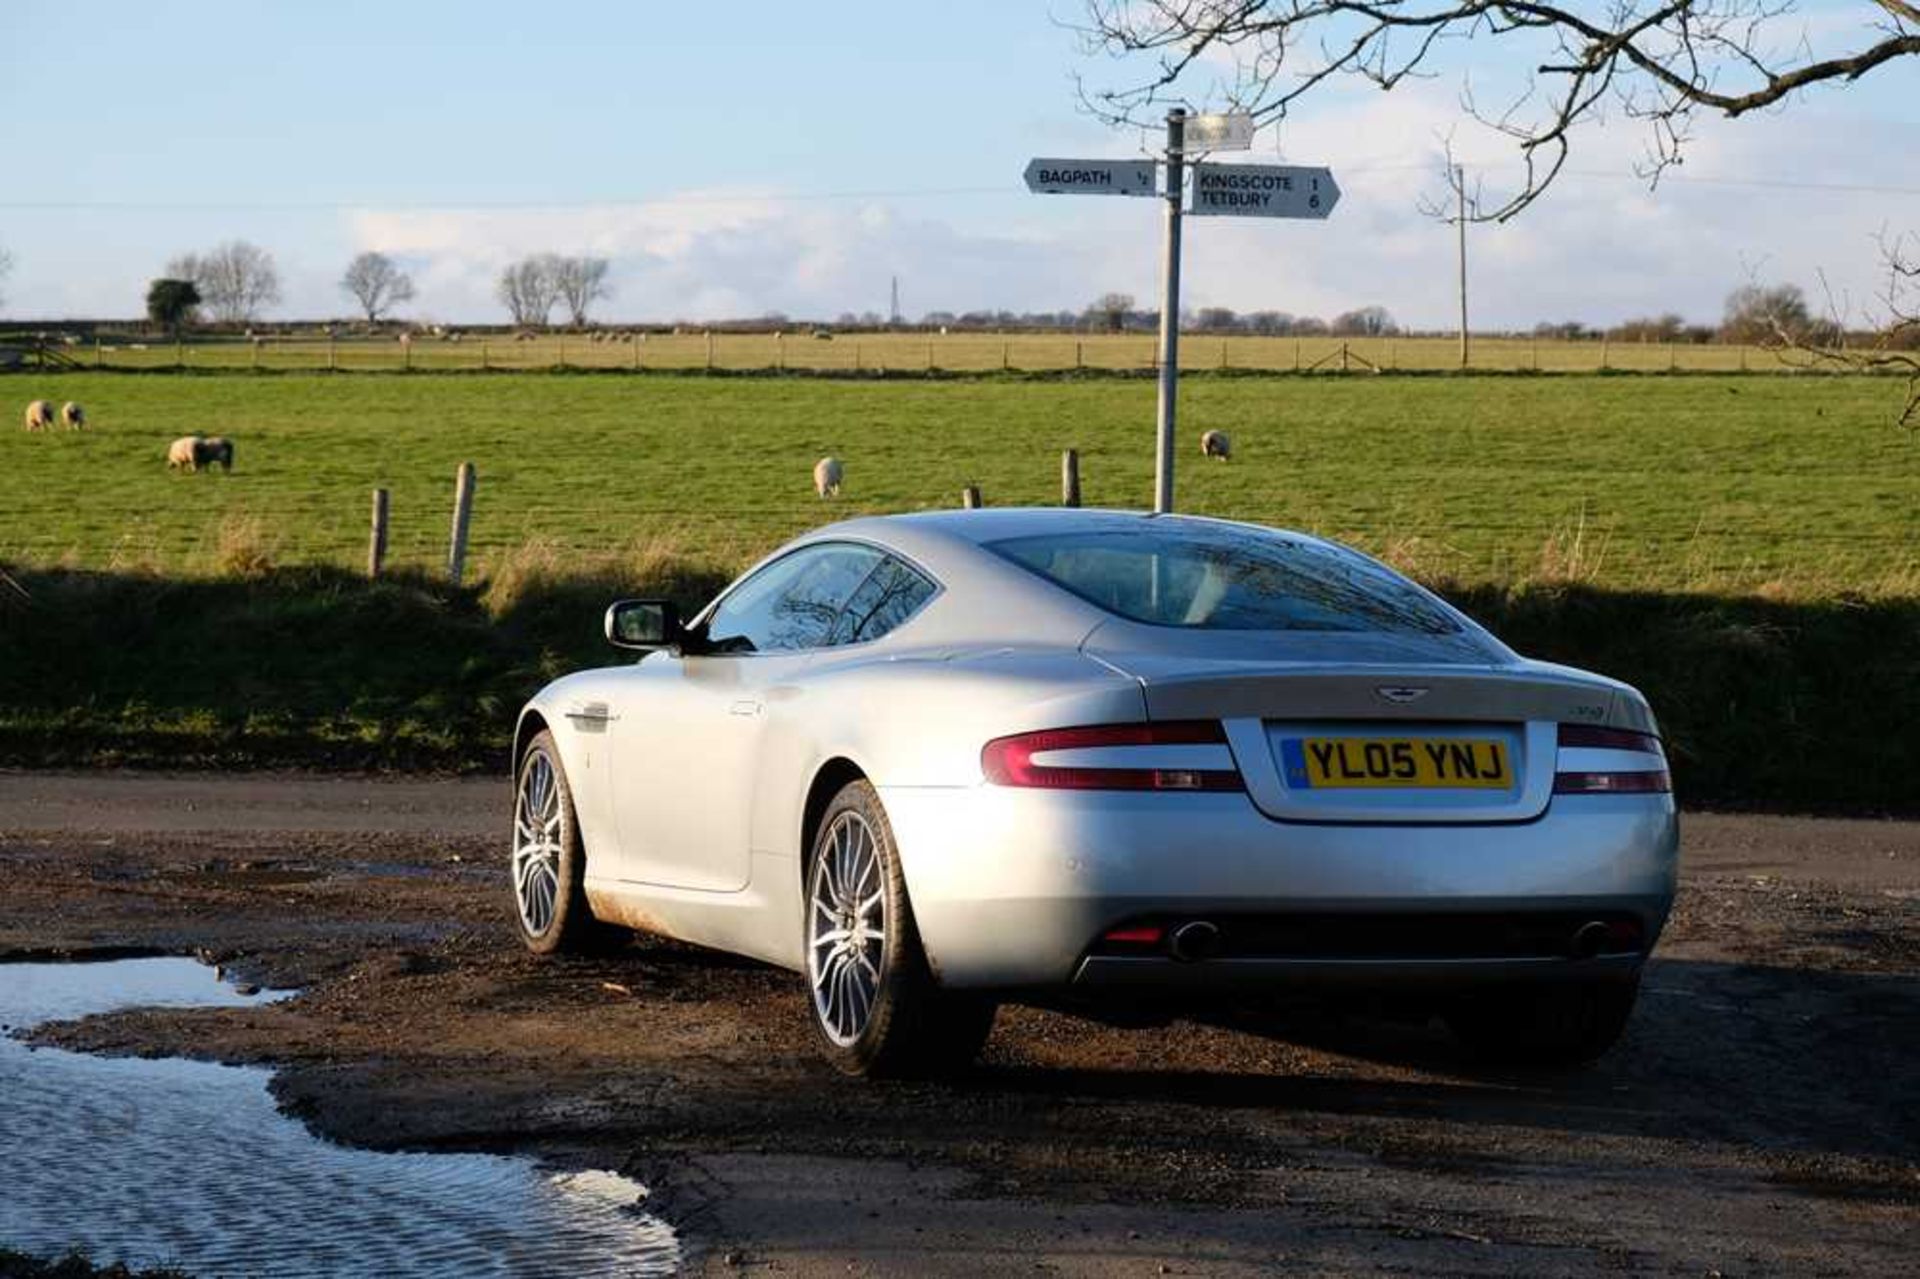 2005 Aston Martin DB9 c.25,000 from new and 4 former keepers - Image 20 of 59